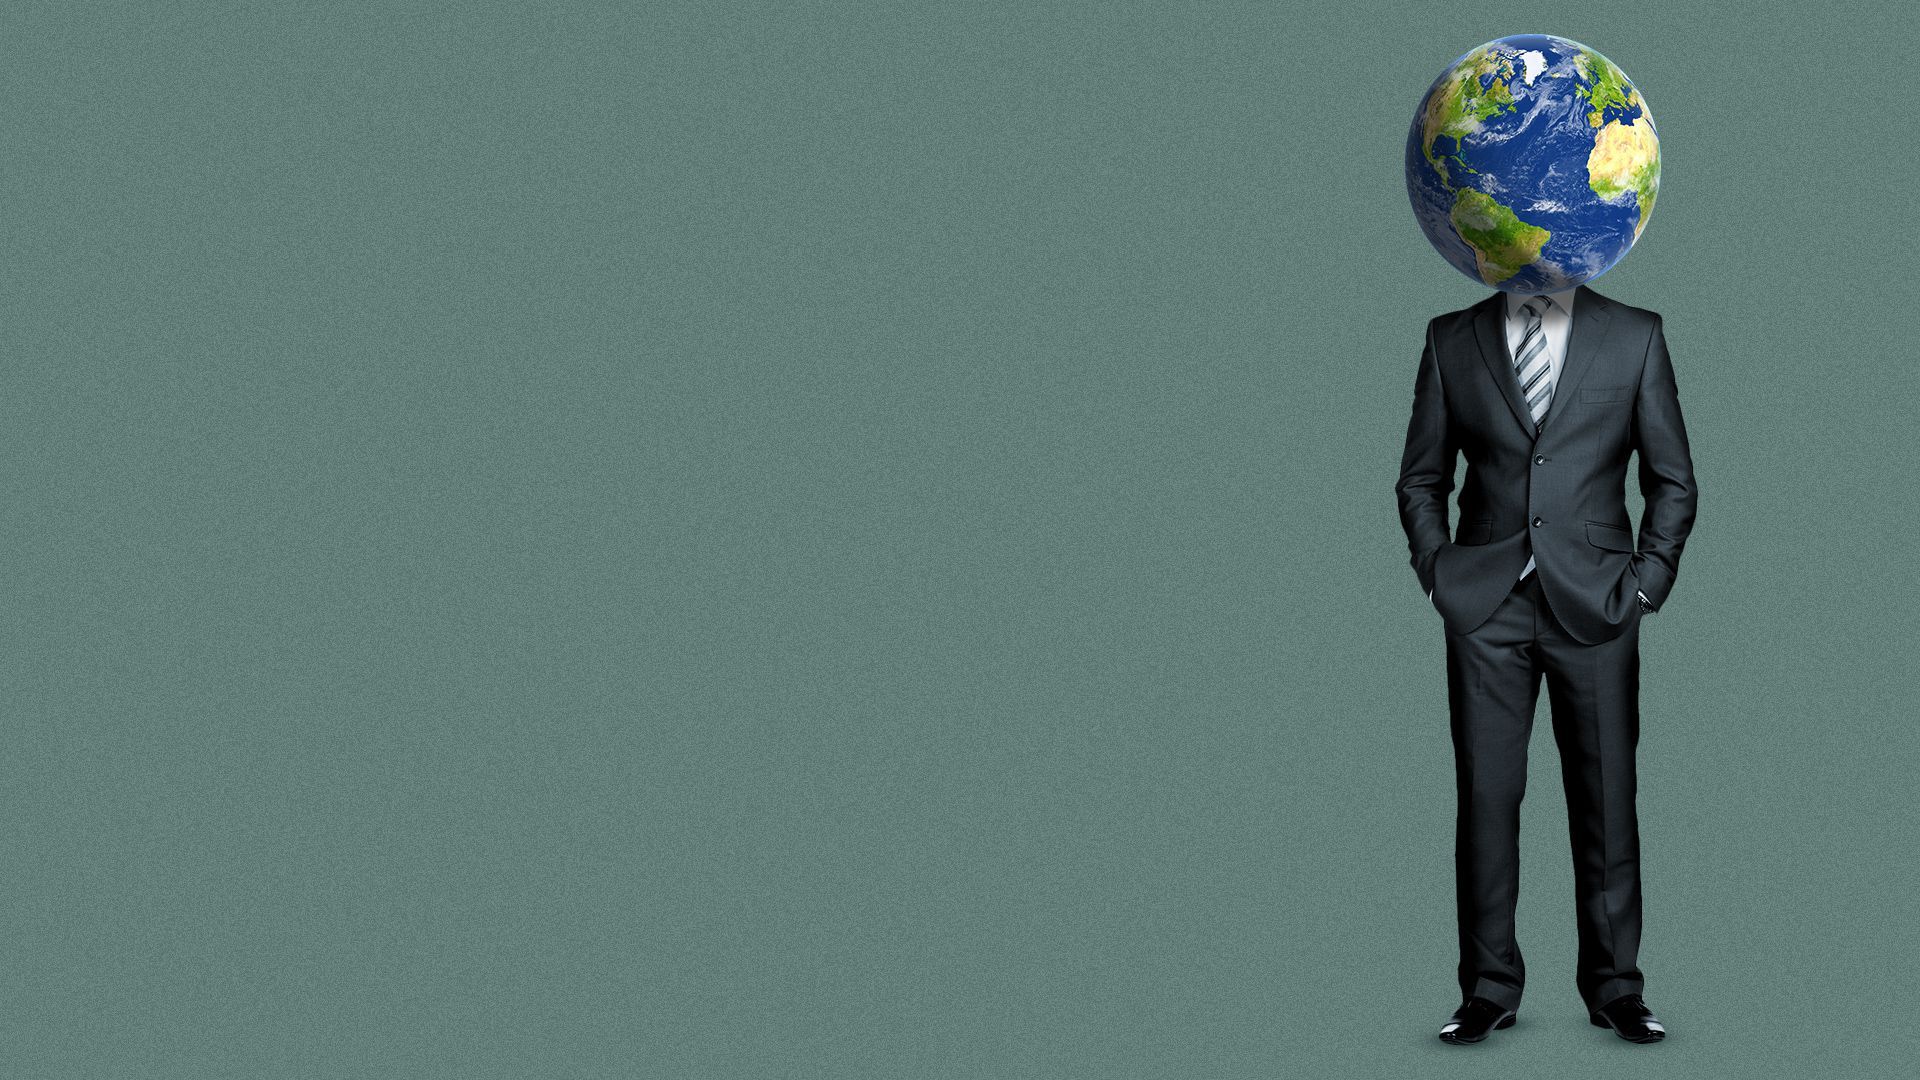 Illustration of the Earth in a suit. 